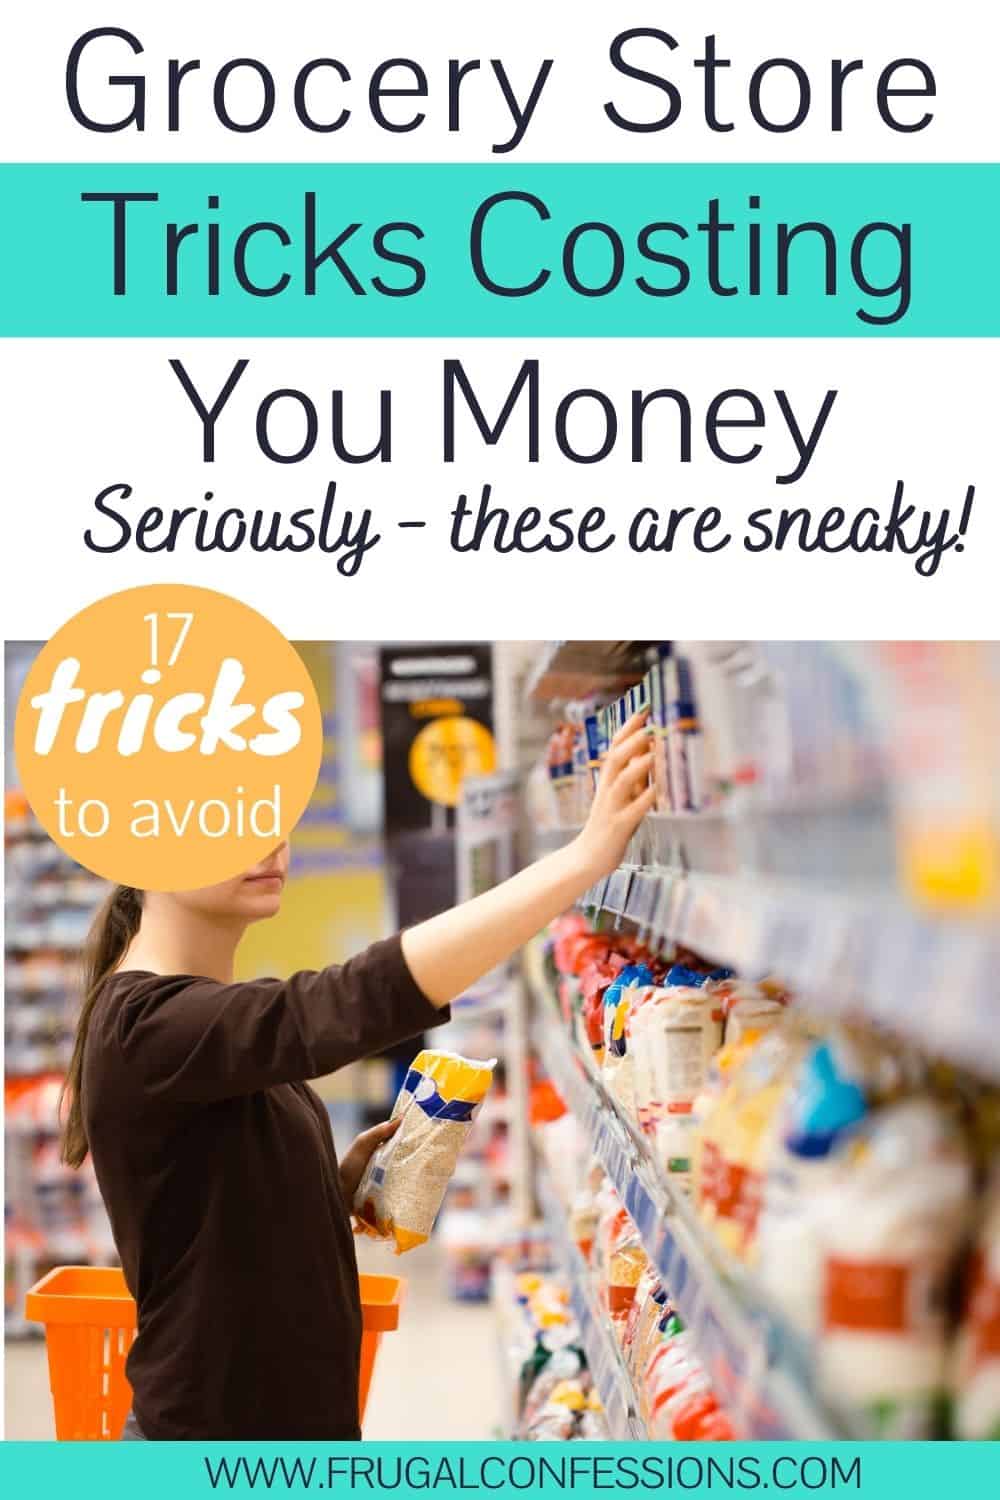 young woman shopping for cheese at grocery store, text overlay "grocery store tricks costing you money"